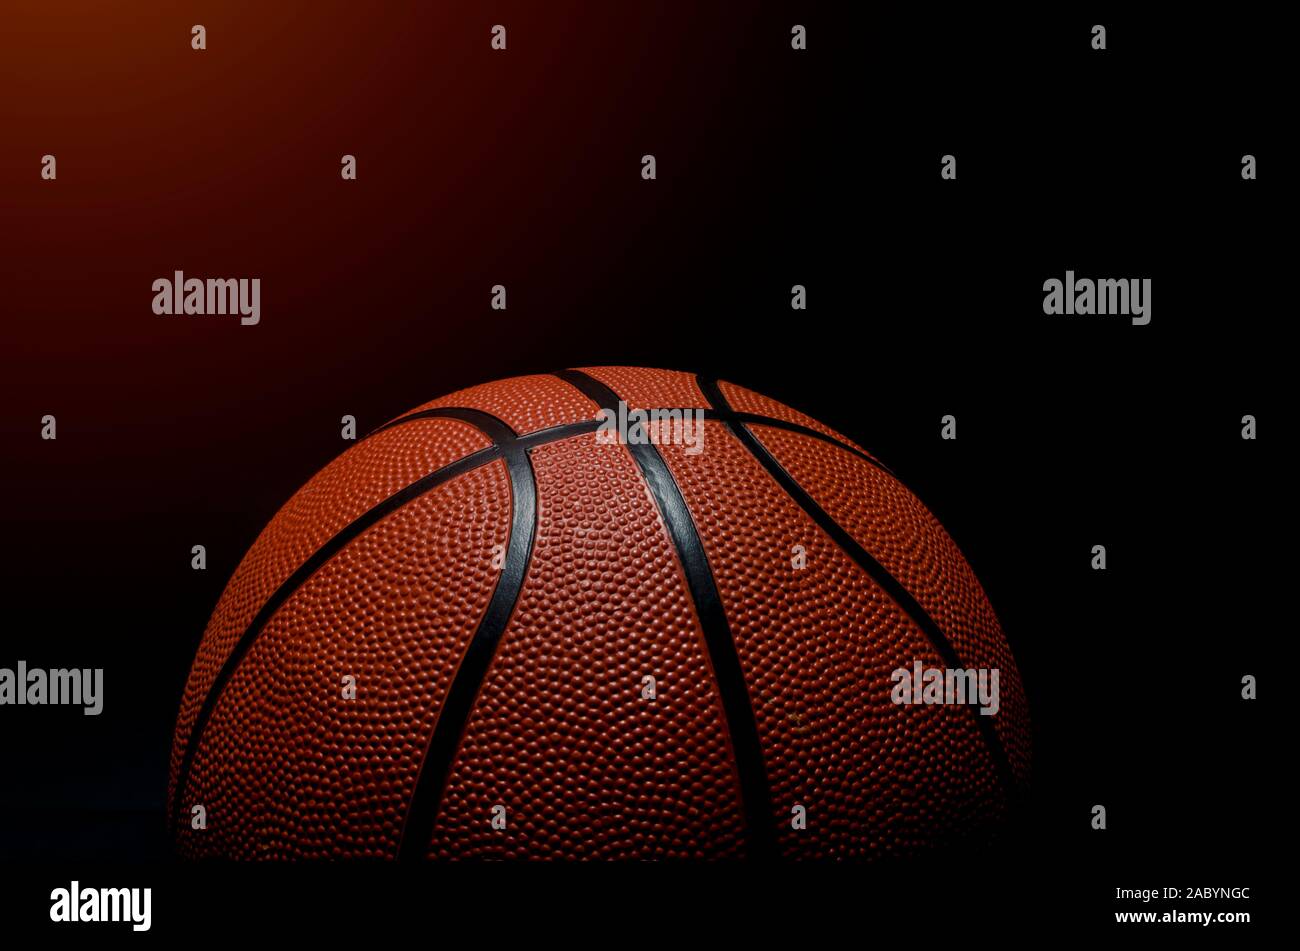 Basketball ball on black background with copy space Stock Photo